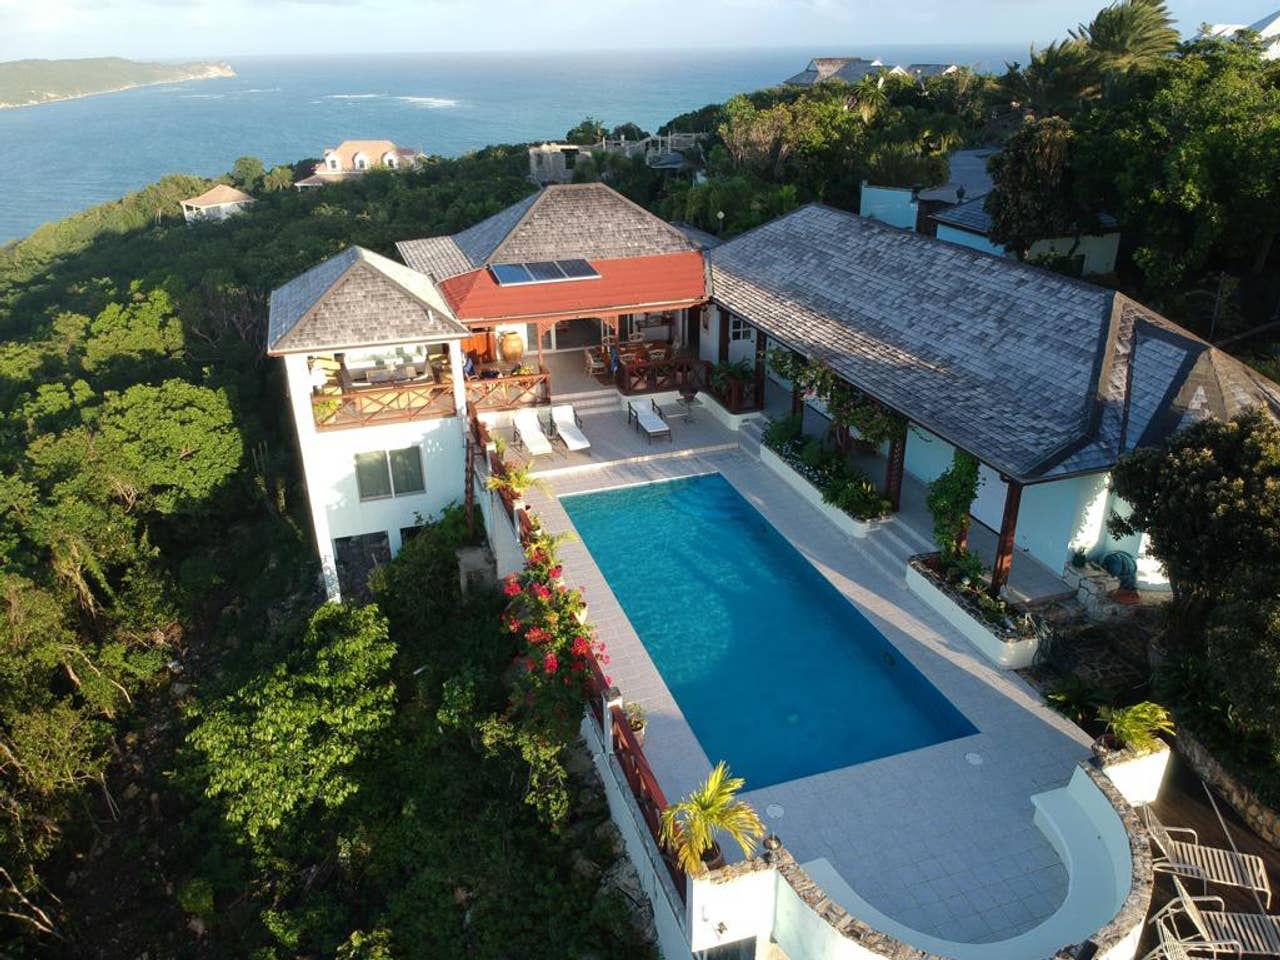 Visiting Antigua? Here Are 10 Of The Best Airbnbs